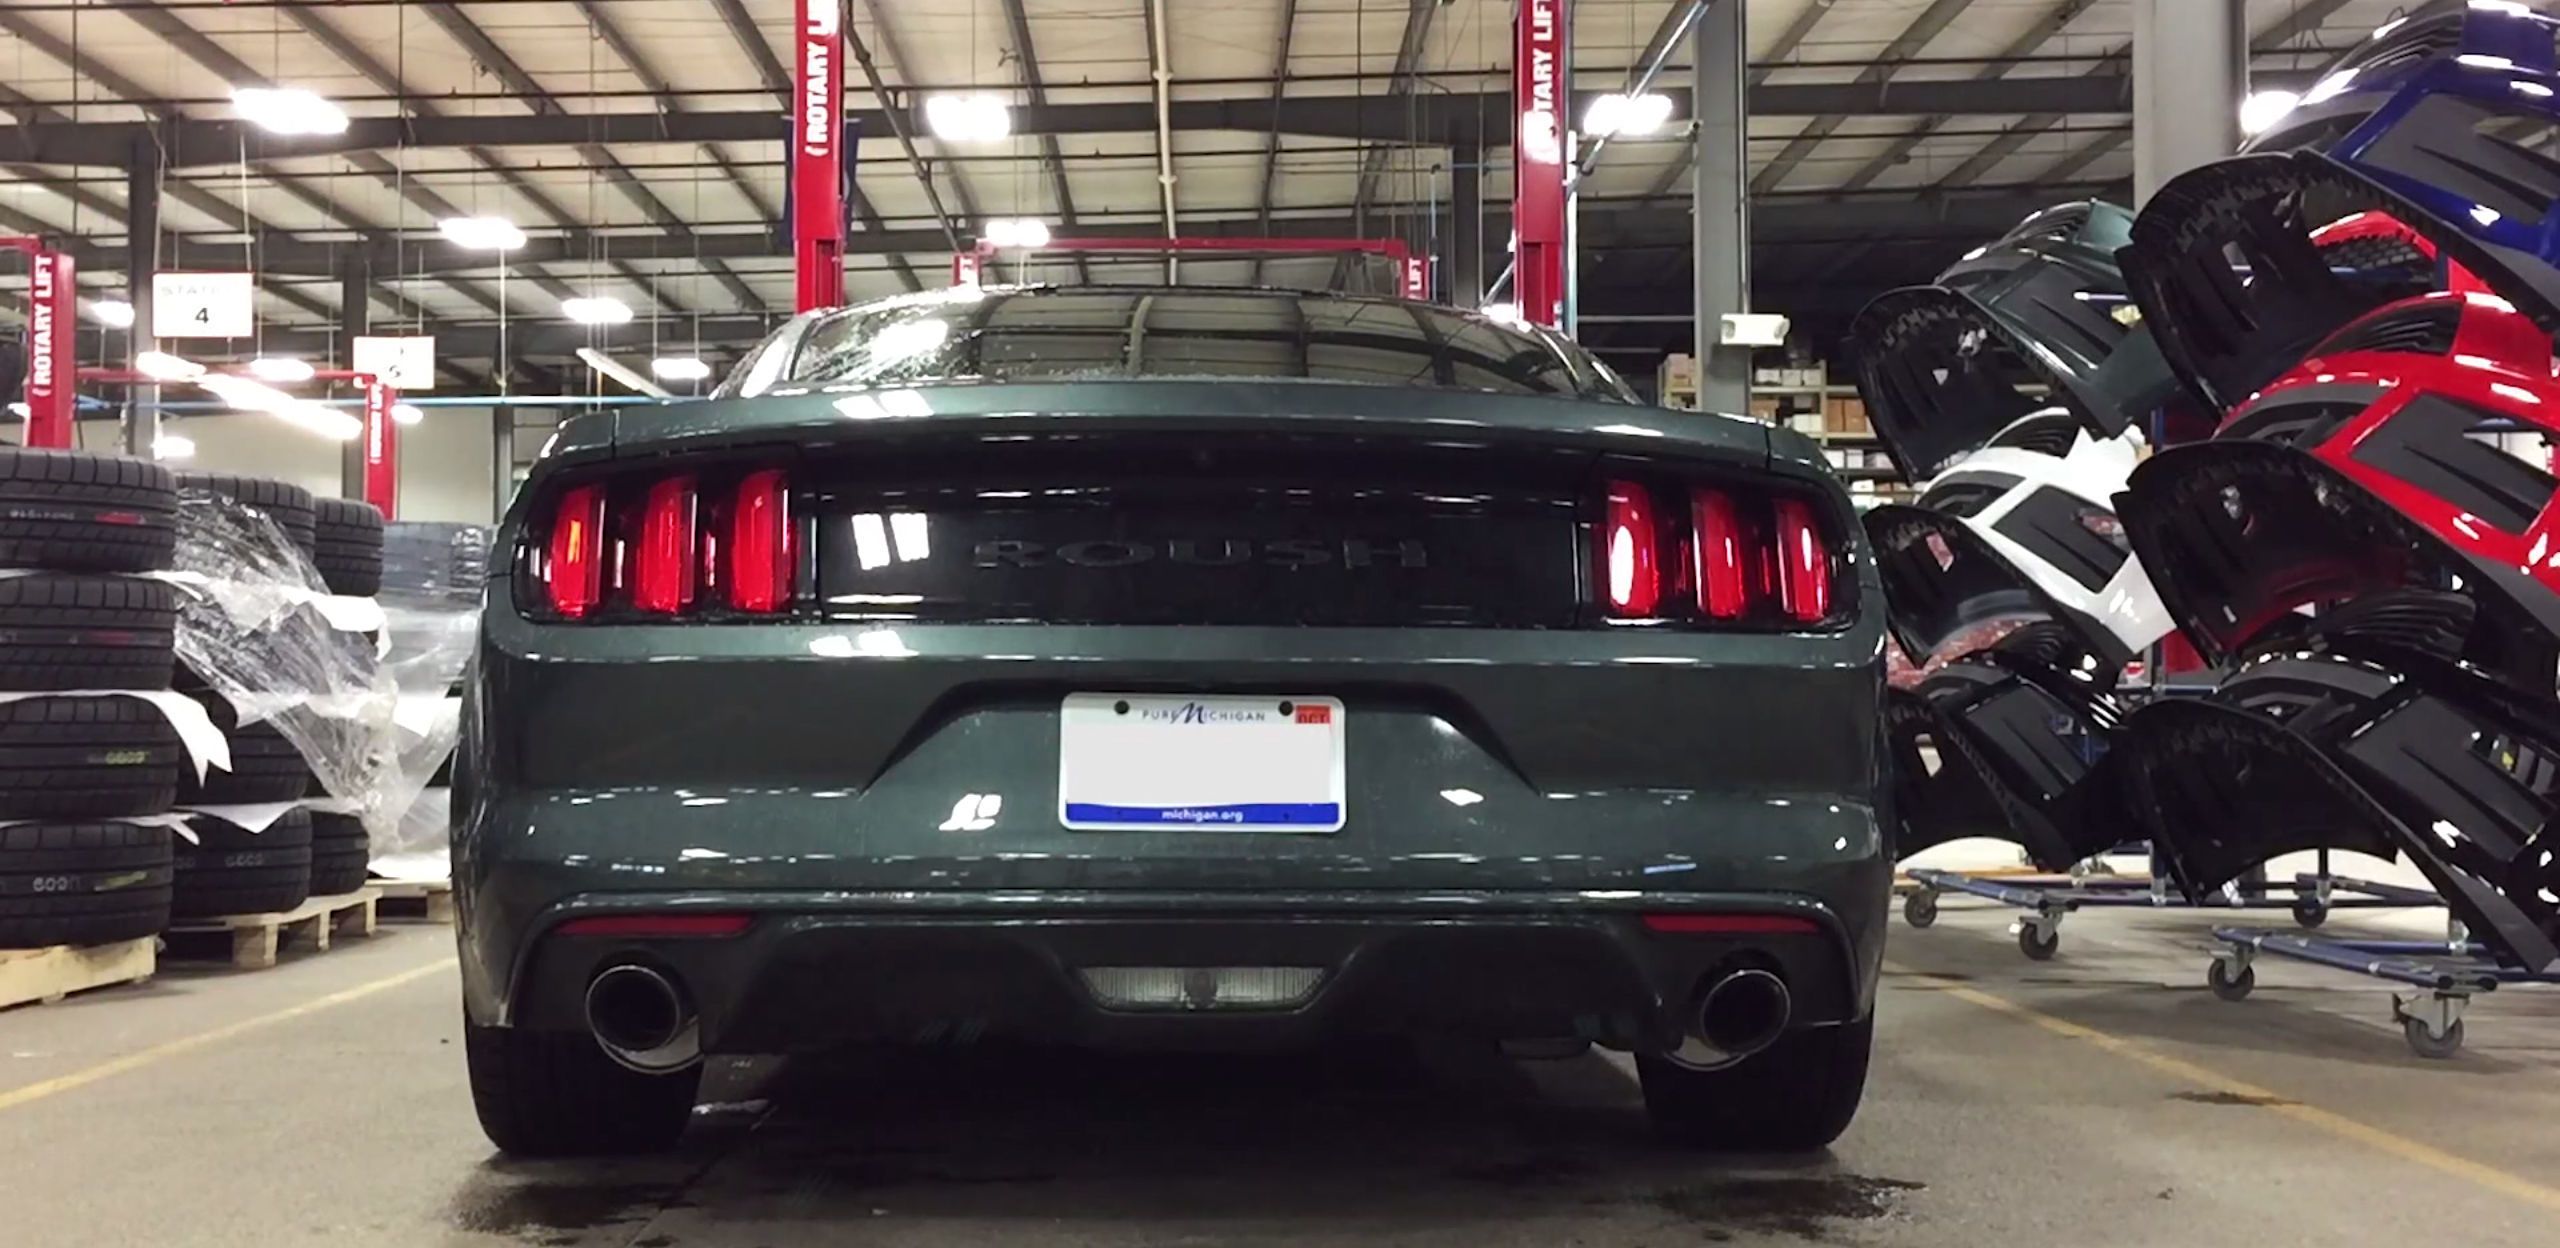 Roush S Ecoboost Mustang Exhaust Still Doesn T Sound Like A Mustang Flipboard